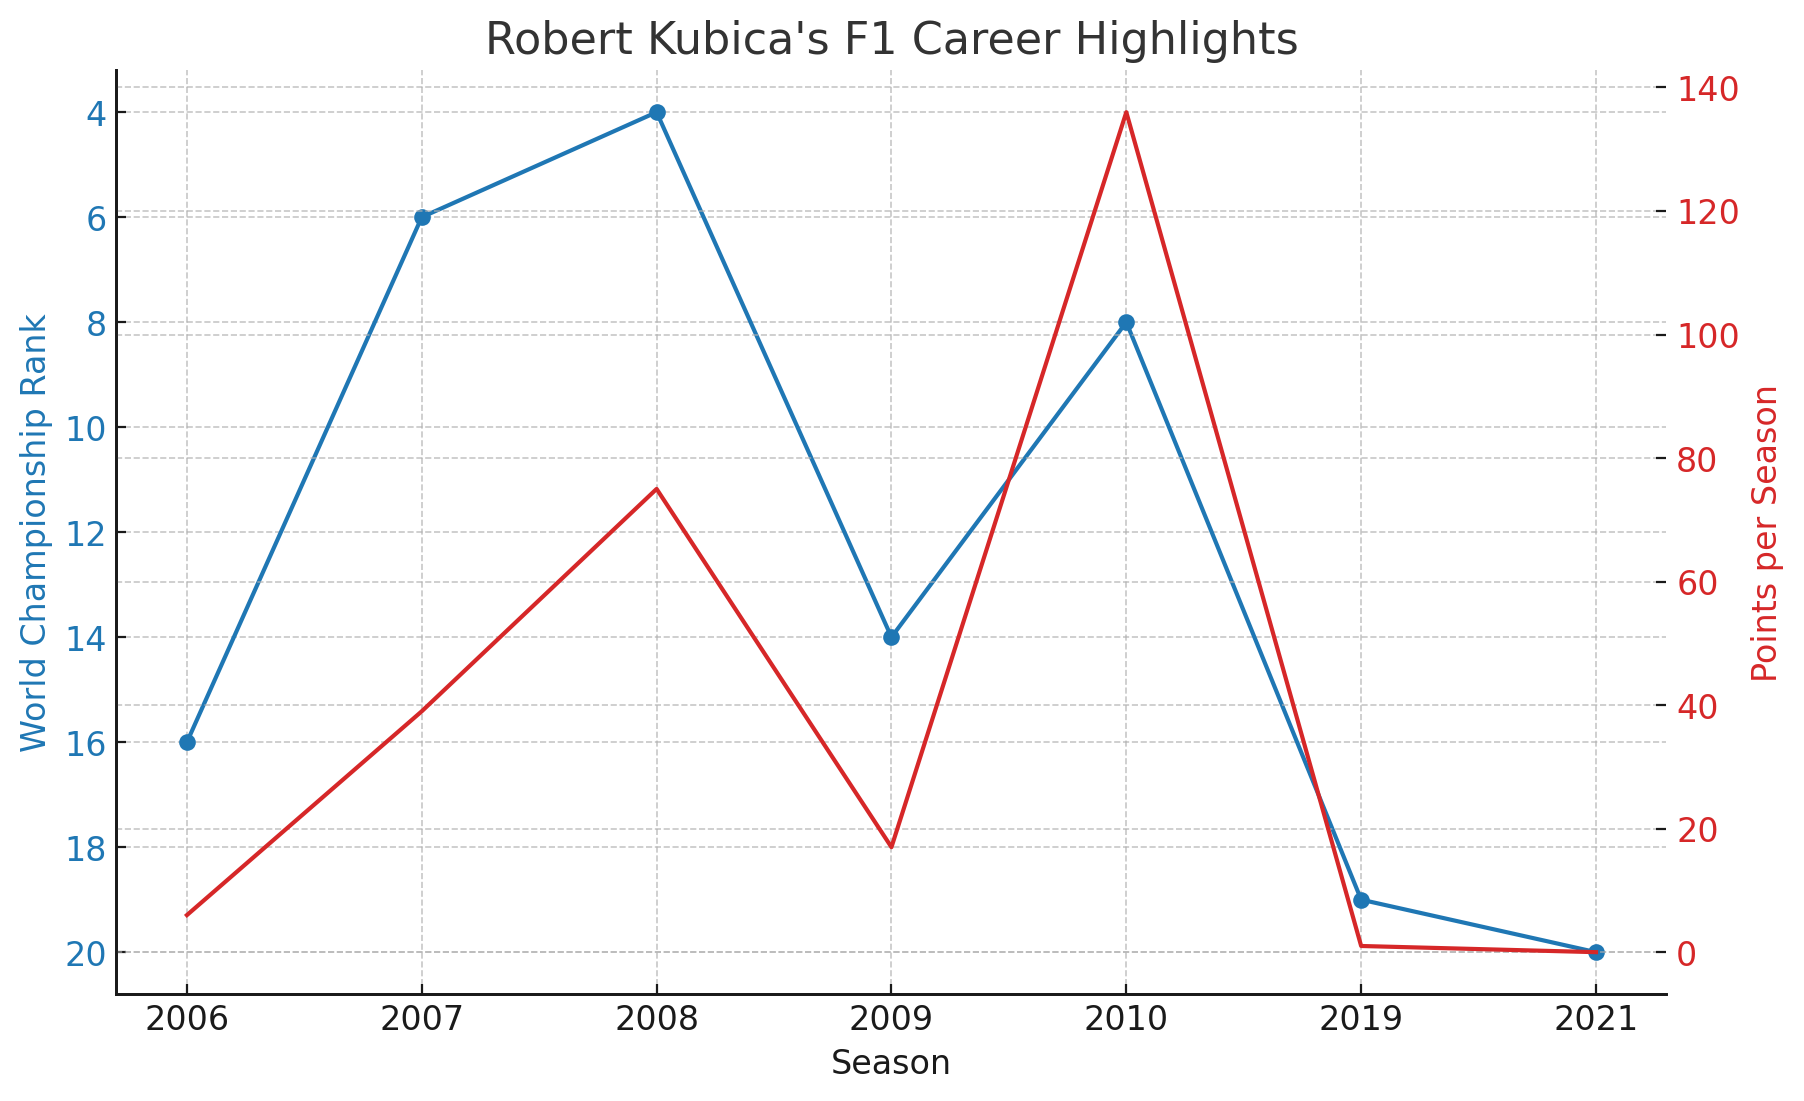 Robert Józef Kubica - Kubica's World Championship ranking and points per season throughout his Formula 1 career. The blue line illustrates his ranking across different seasons, with an inverse axis to highlight lower (better) ranks as higher on the chart. The red line depicts the points he accumulated each season, showcasing his peak performance years and the fluctuations in his career.